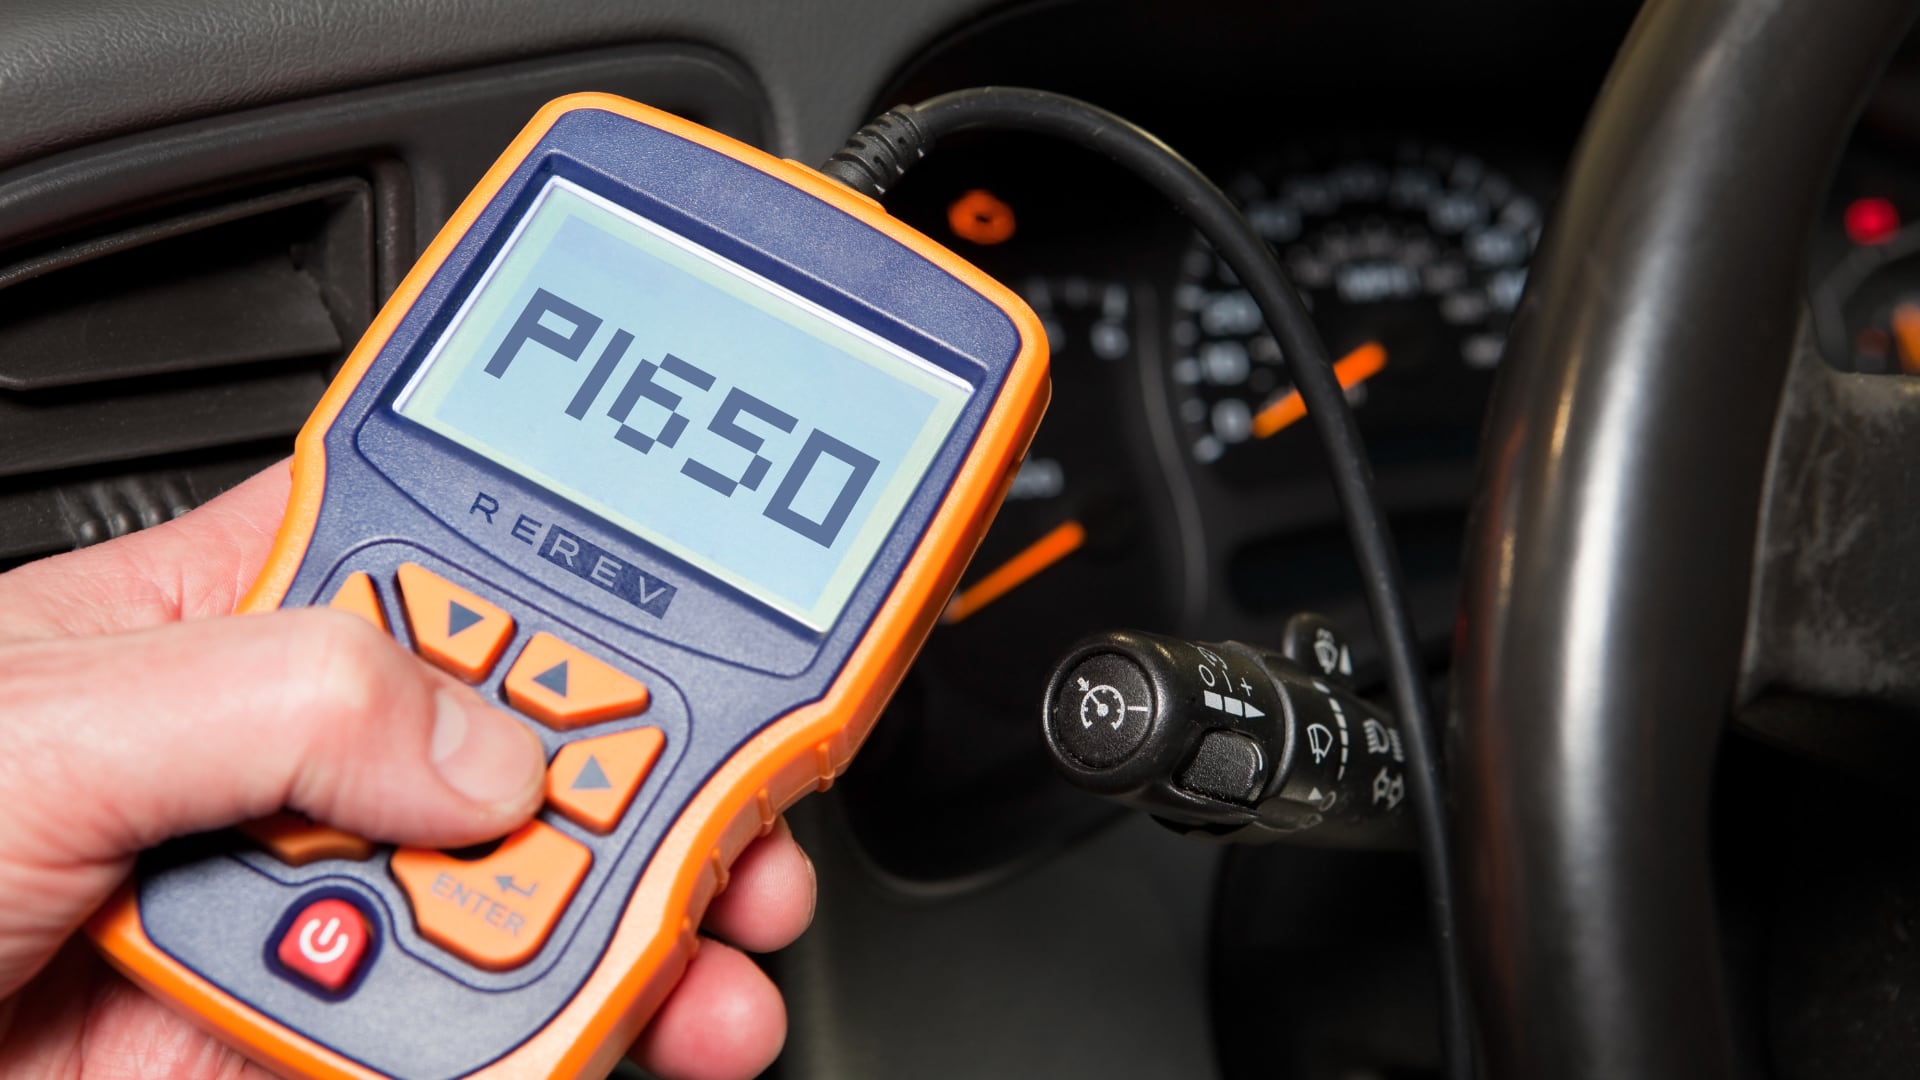 A person is holding a device that reads psi50 in a car.